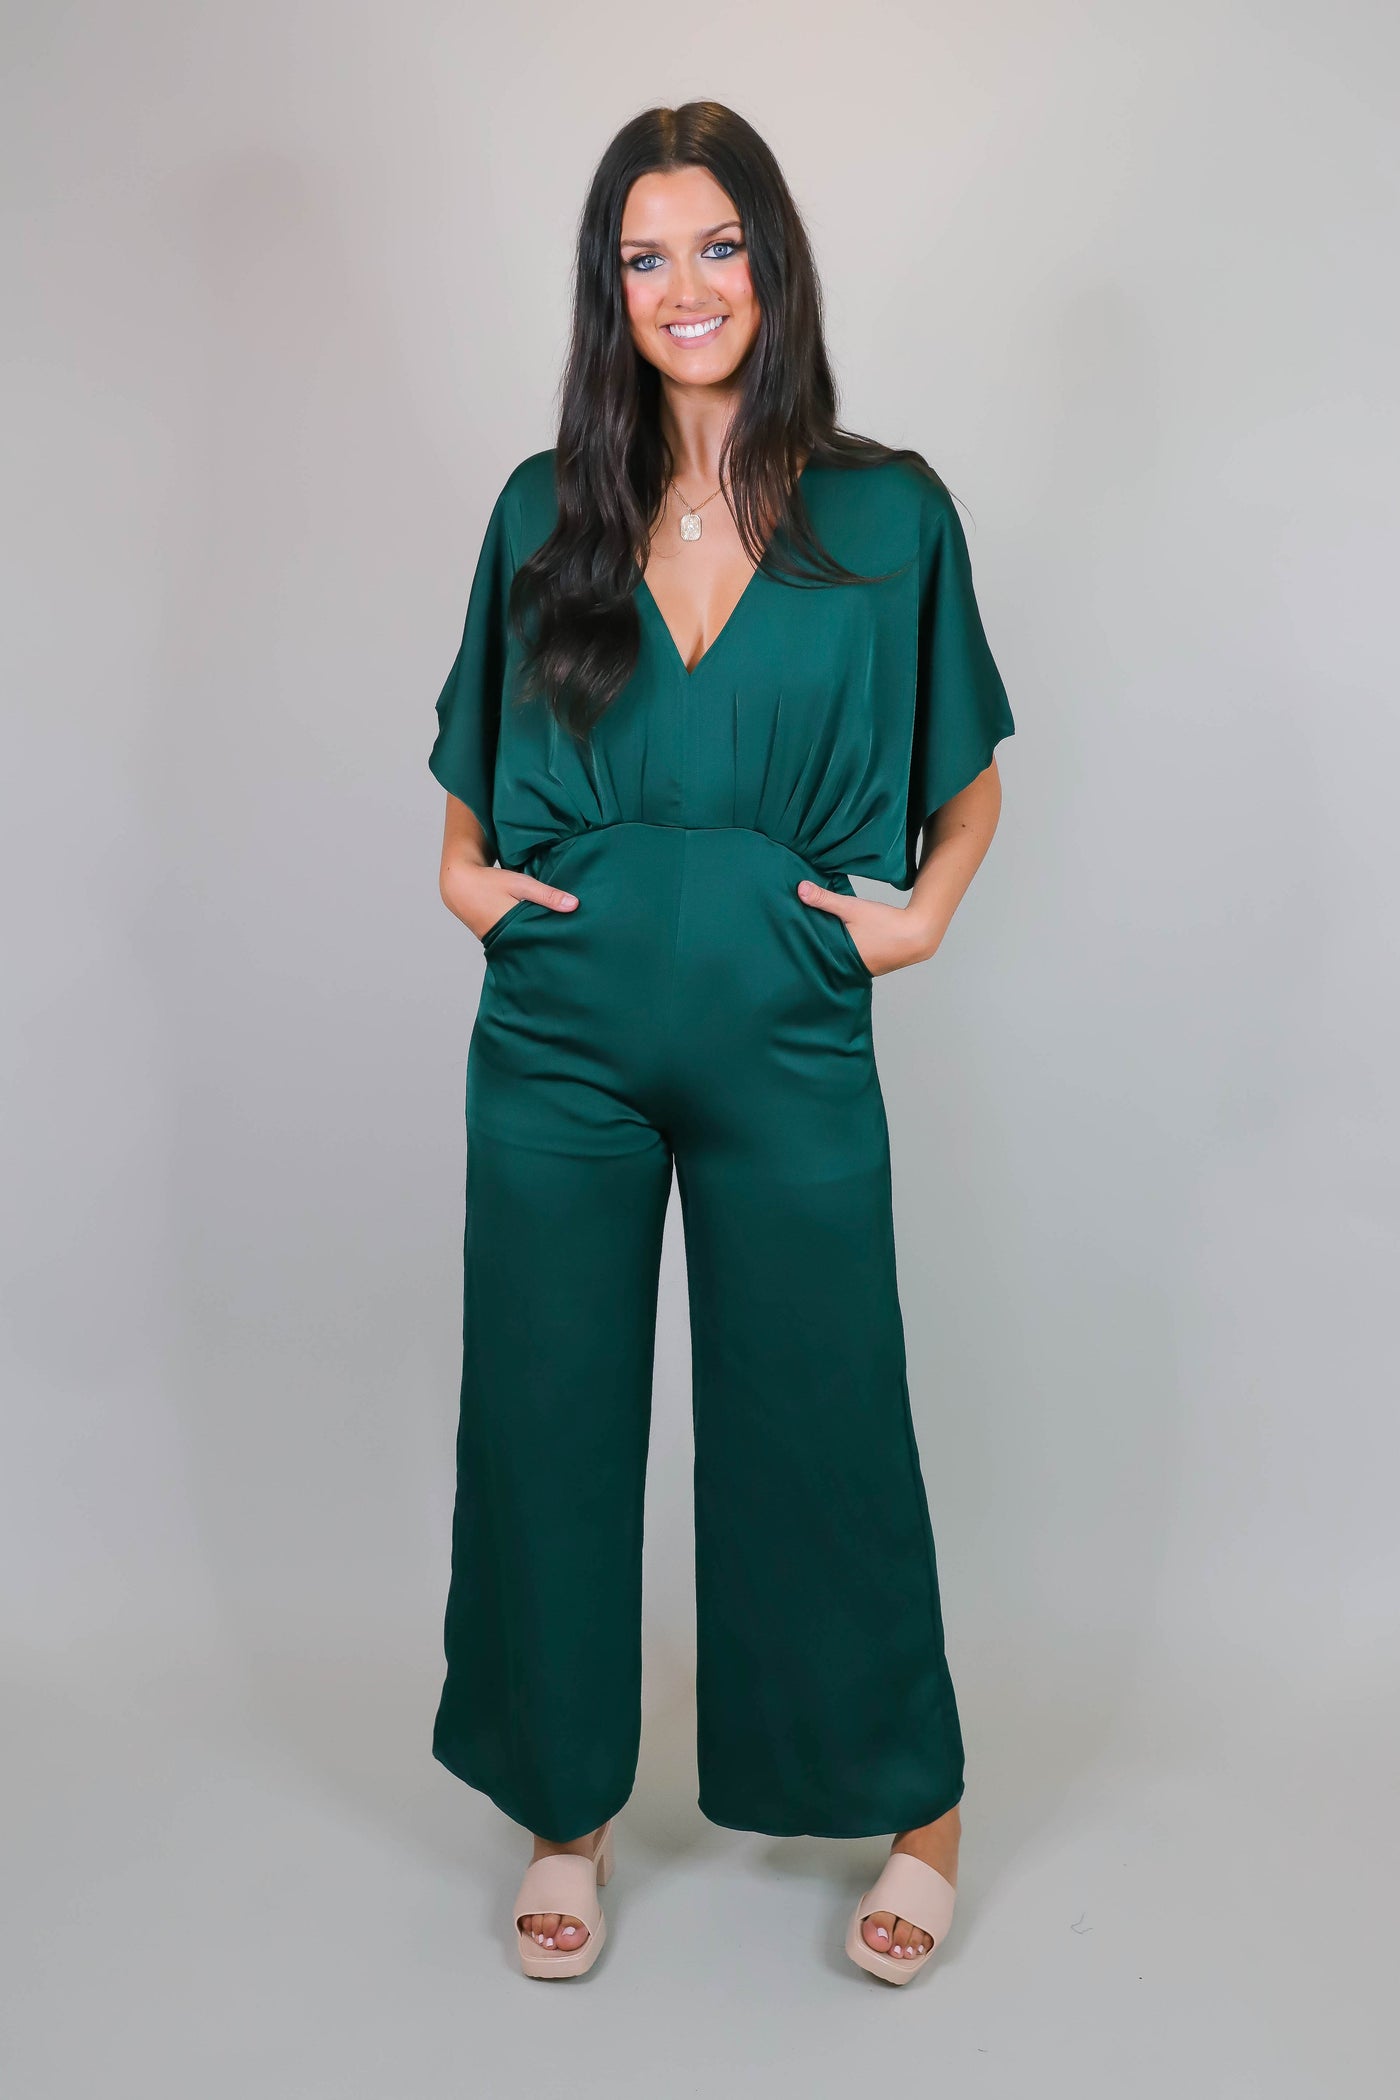 Buy FABALLEY Solid Satin Regular Fit Women's Short Sleeves Jumpsuit |  Shoppers Stop